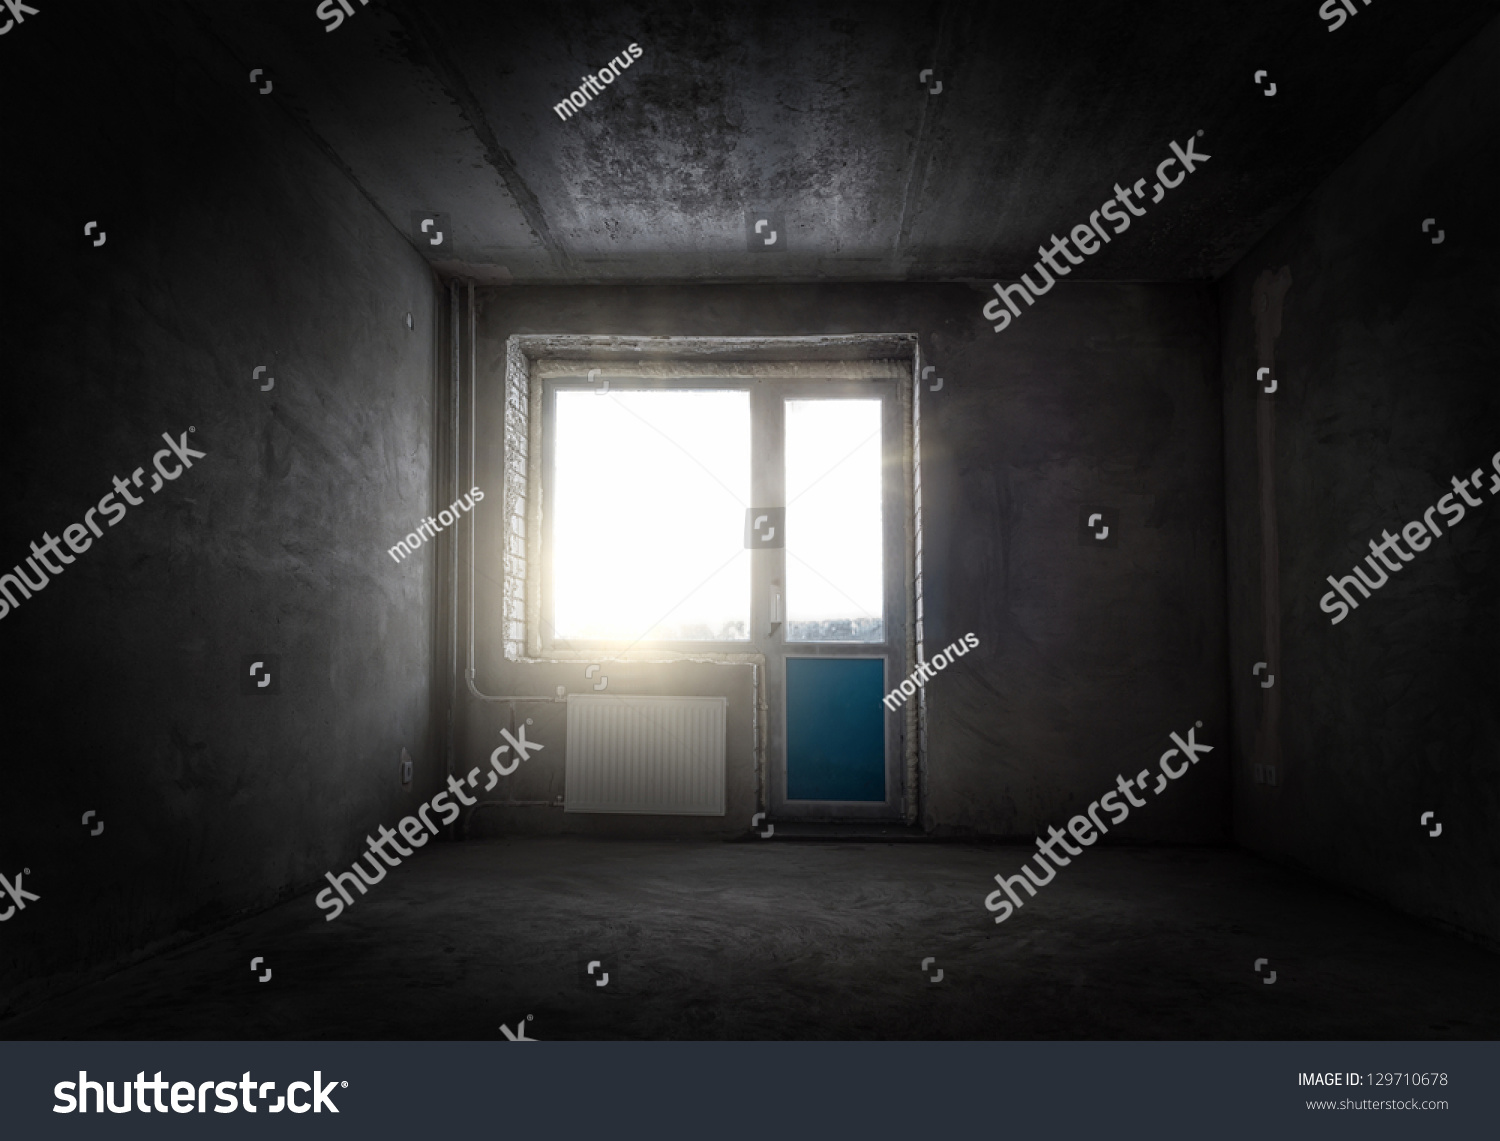 Grungy empty room with gray walls and a window #129710678